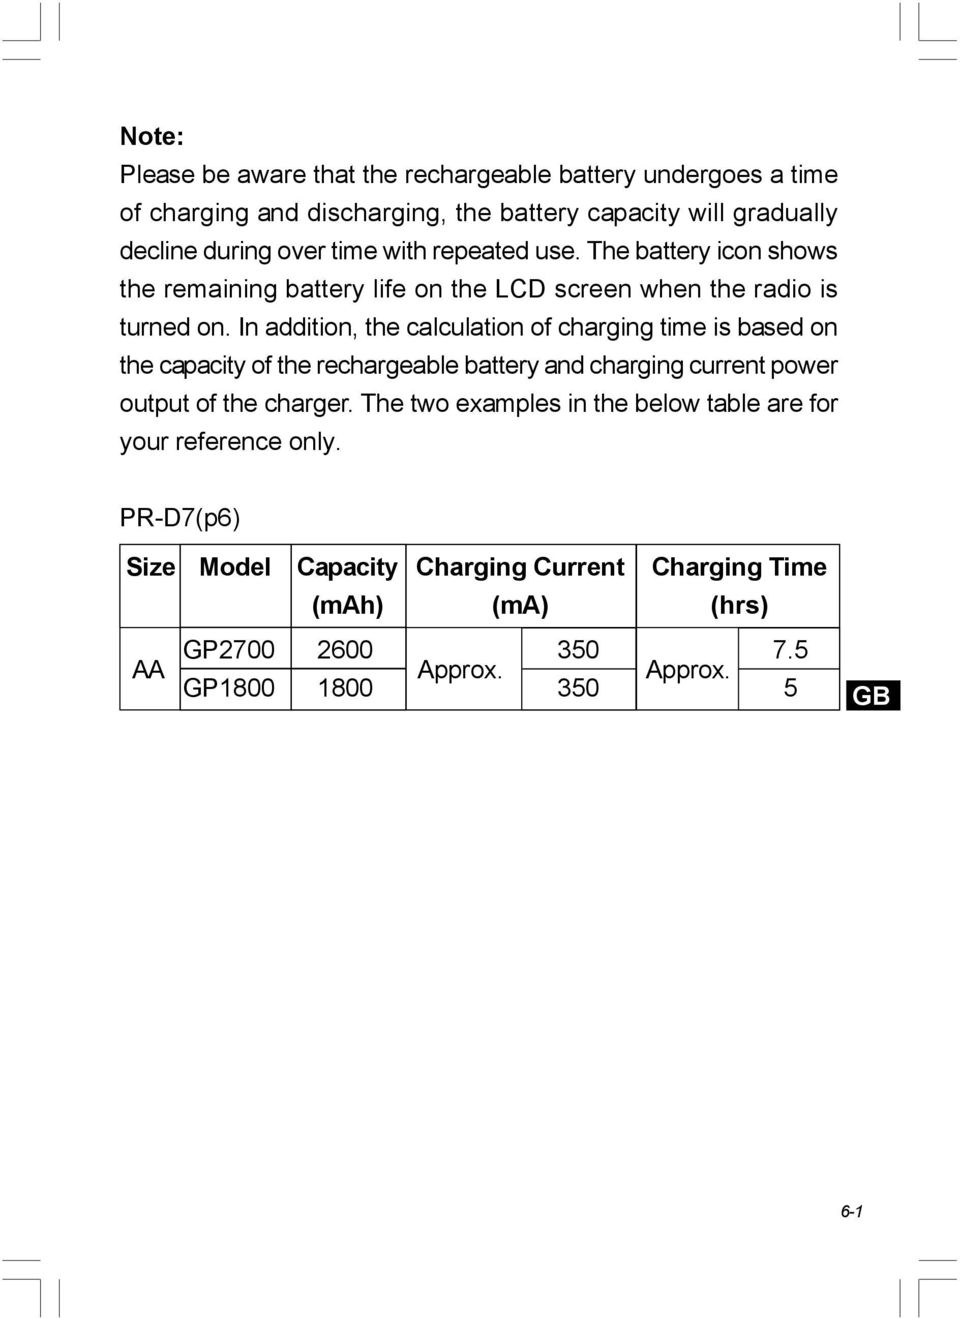 In addition, the calculation of charging time is based on the capacity of the rechargeable battery and charging current power output of the charger.